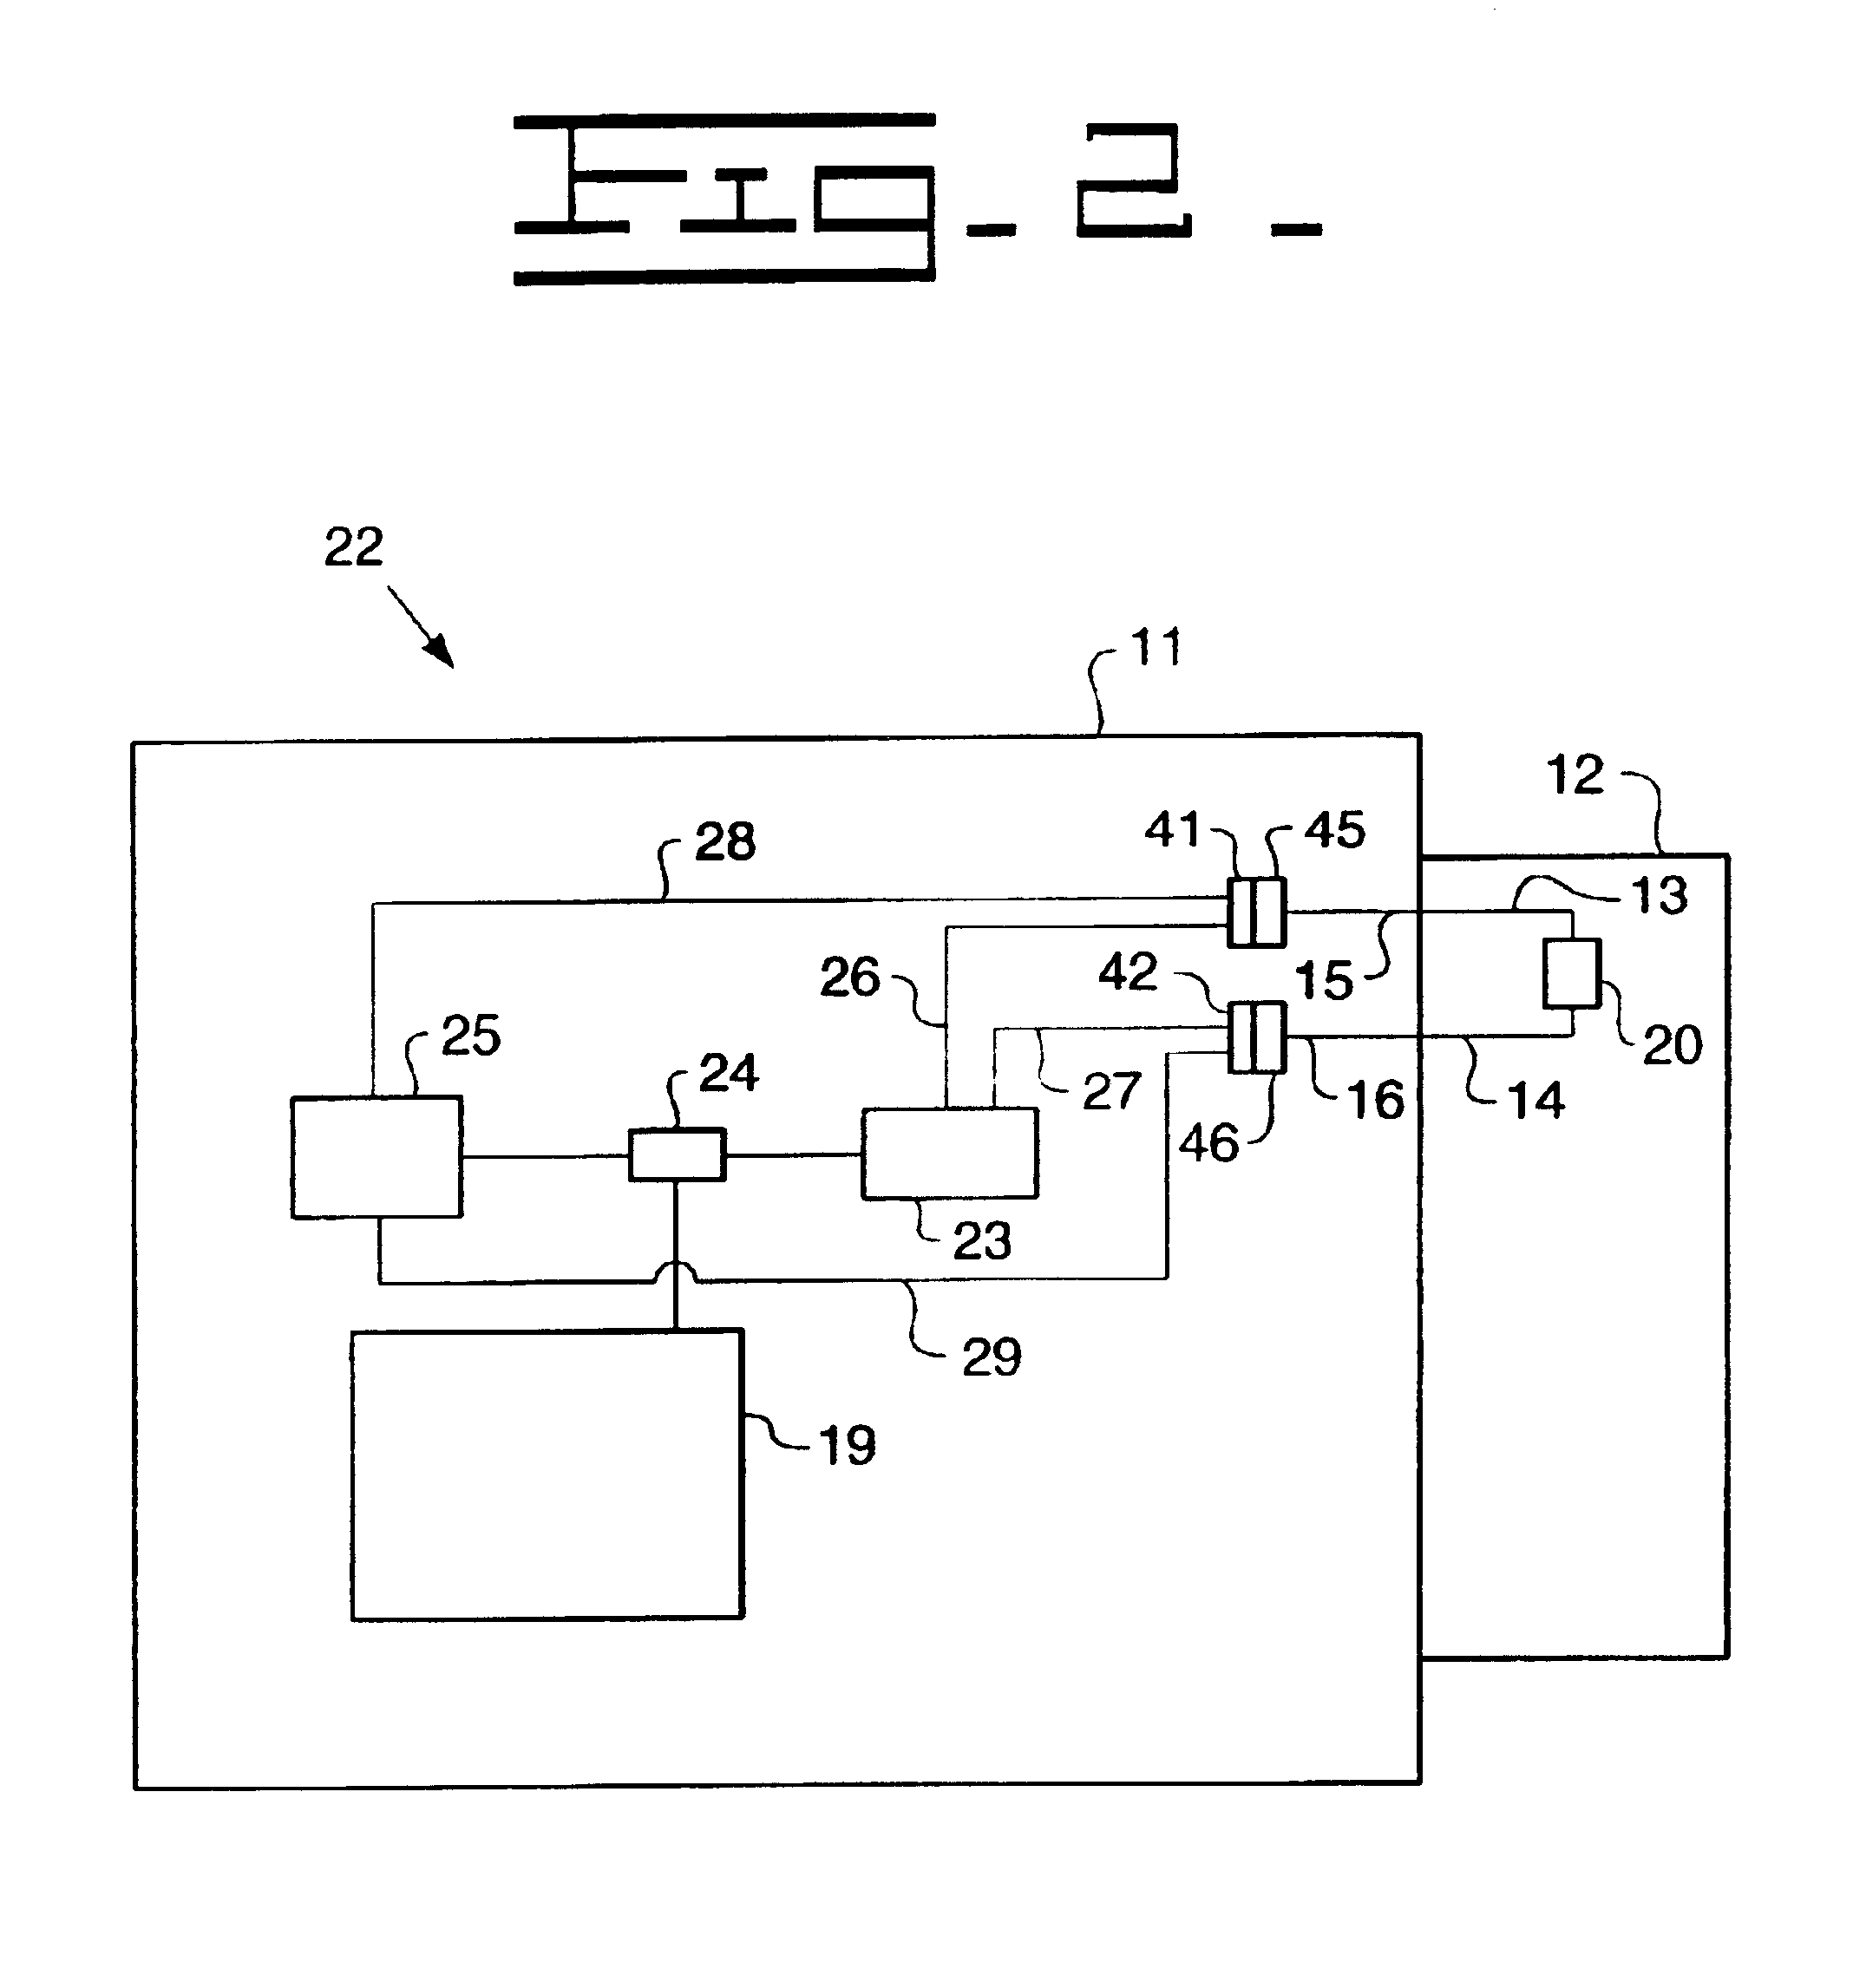 Control system for, and a method of, disengaging a hydraulically-driven implement from a work machine